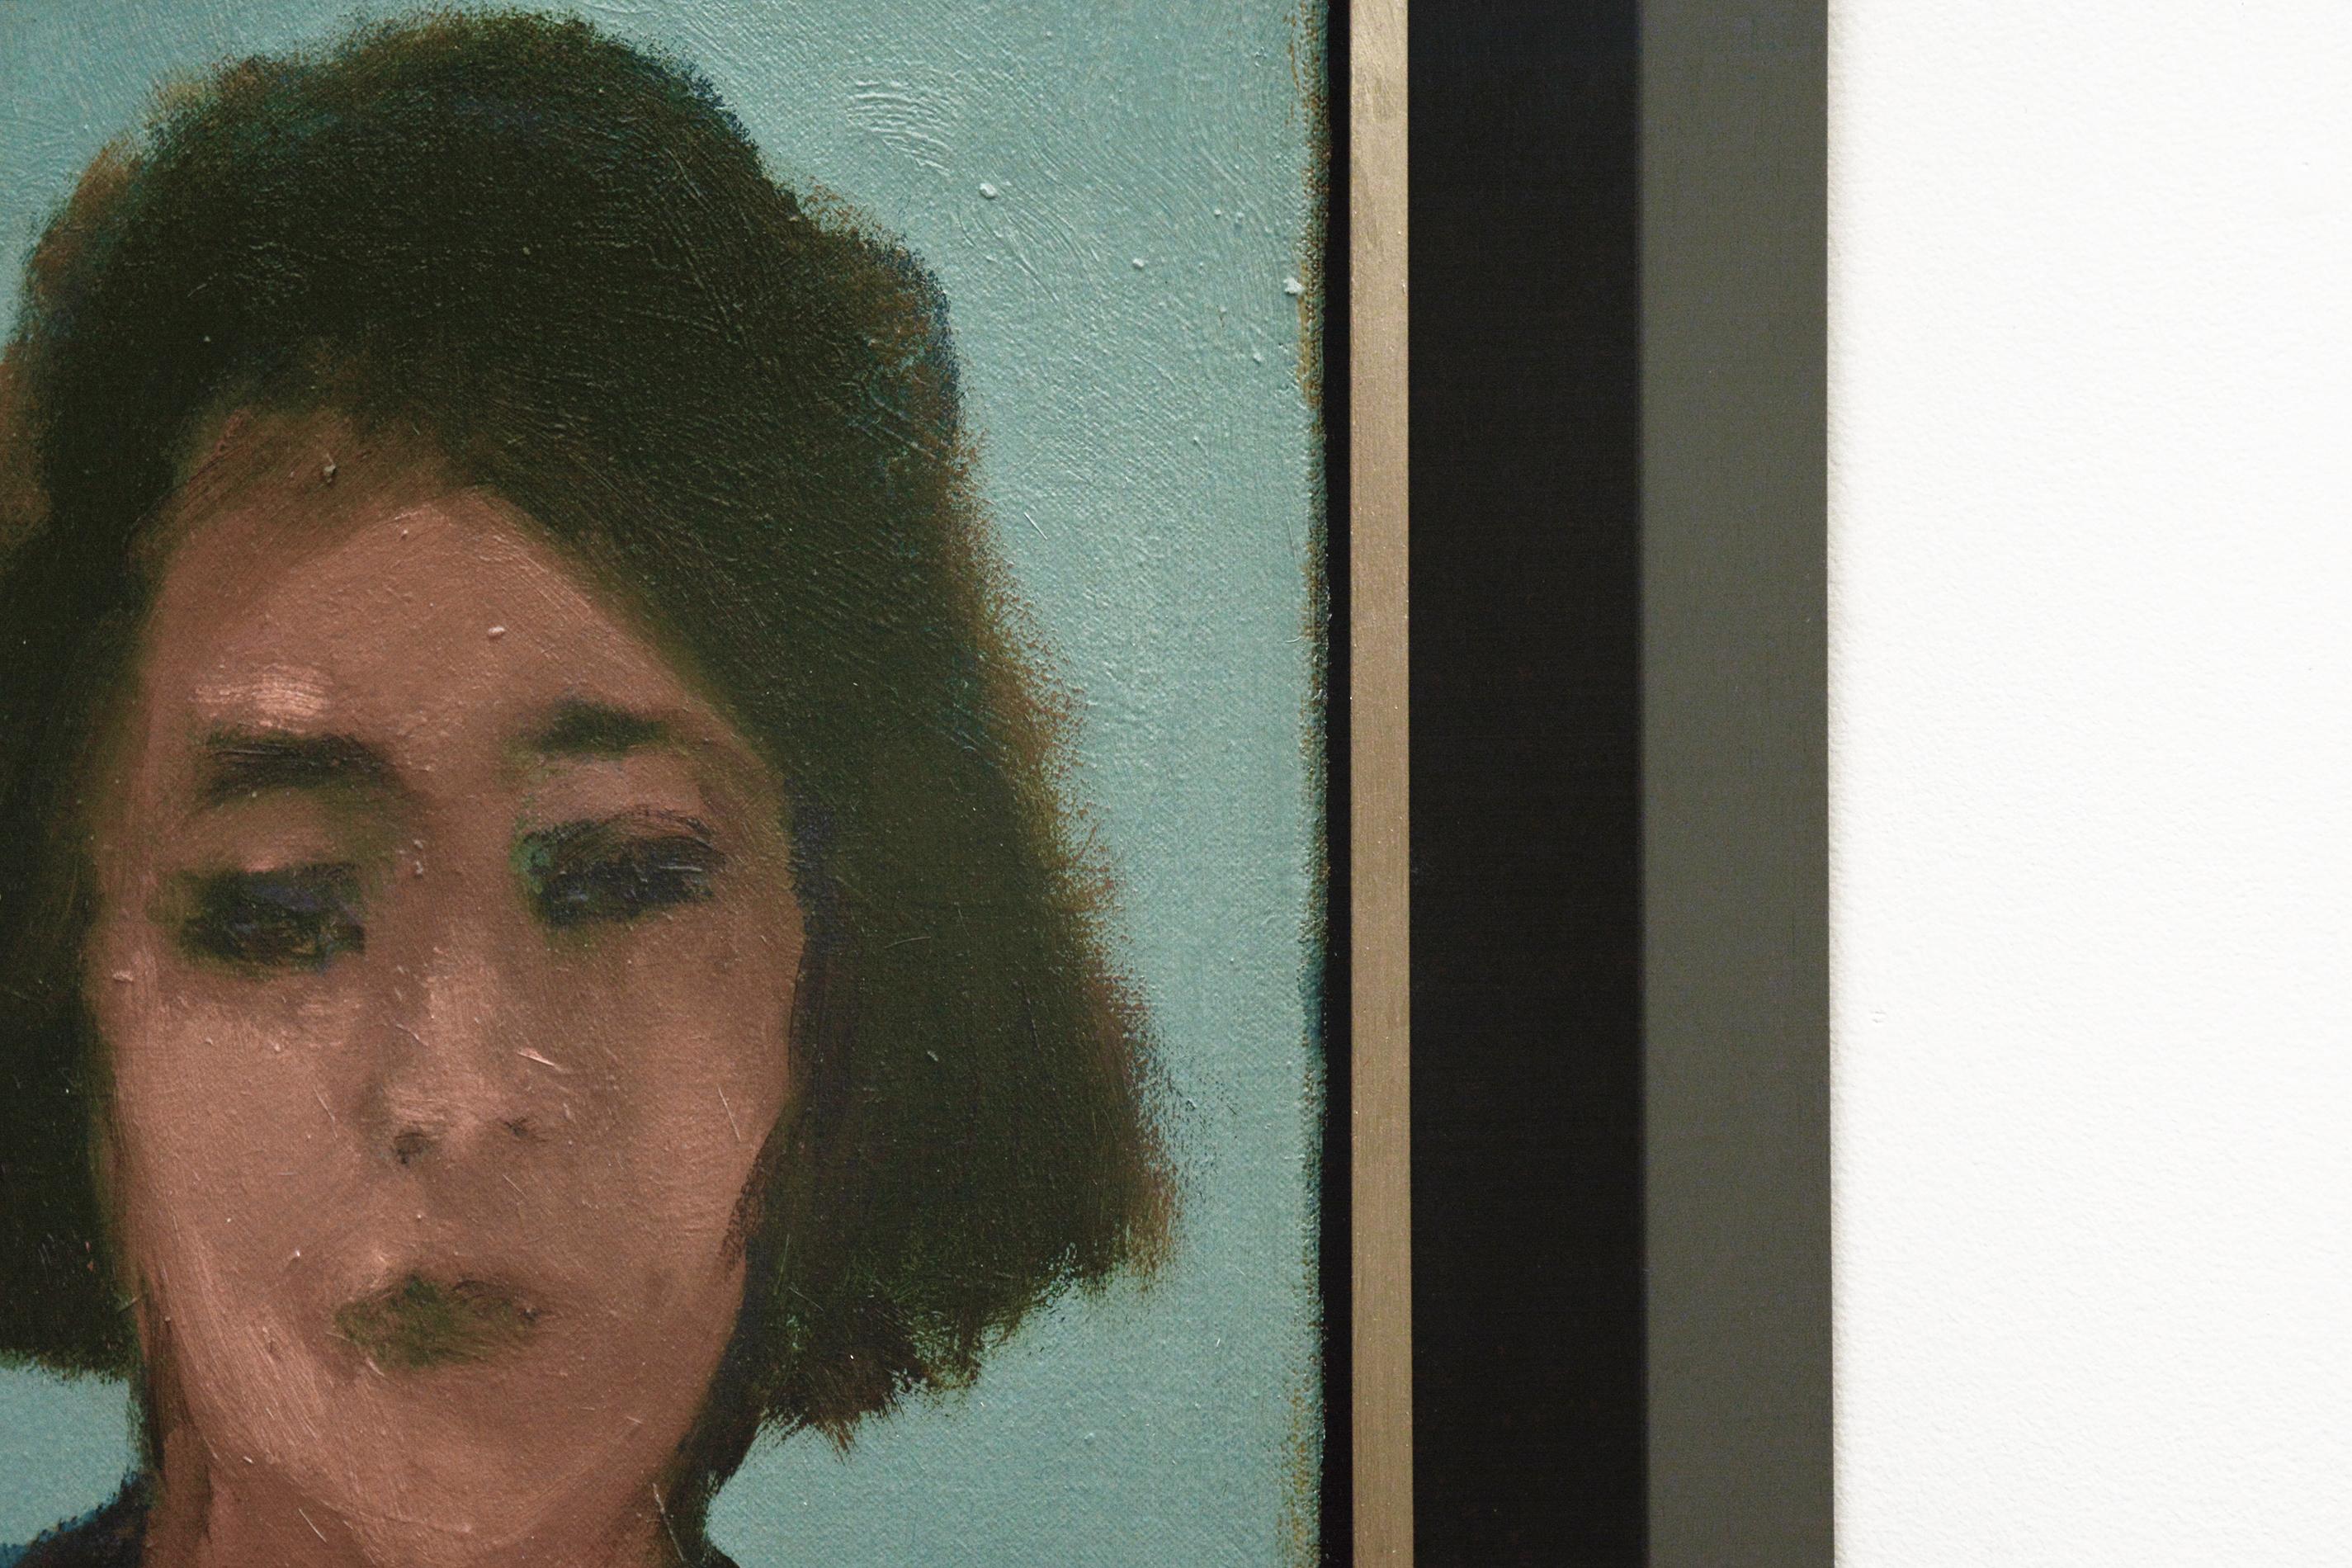 Small, intimate and incredibly emotive portrait of a woman in a blue patterned dress. Hornyak's figurative compositions are built up through a complex technique of rich green, blue, yellow, red, pink and white glazes.  Framed size is 21 x 21